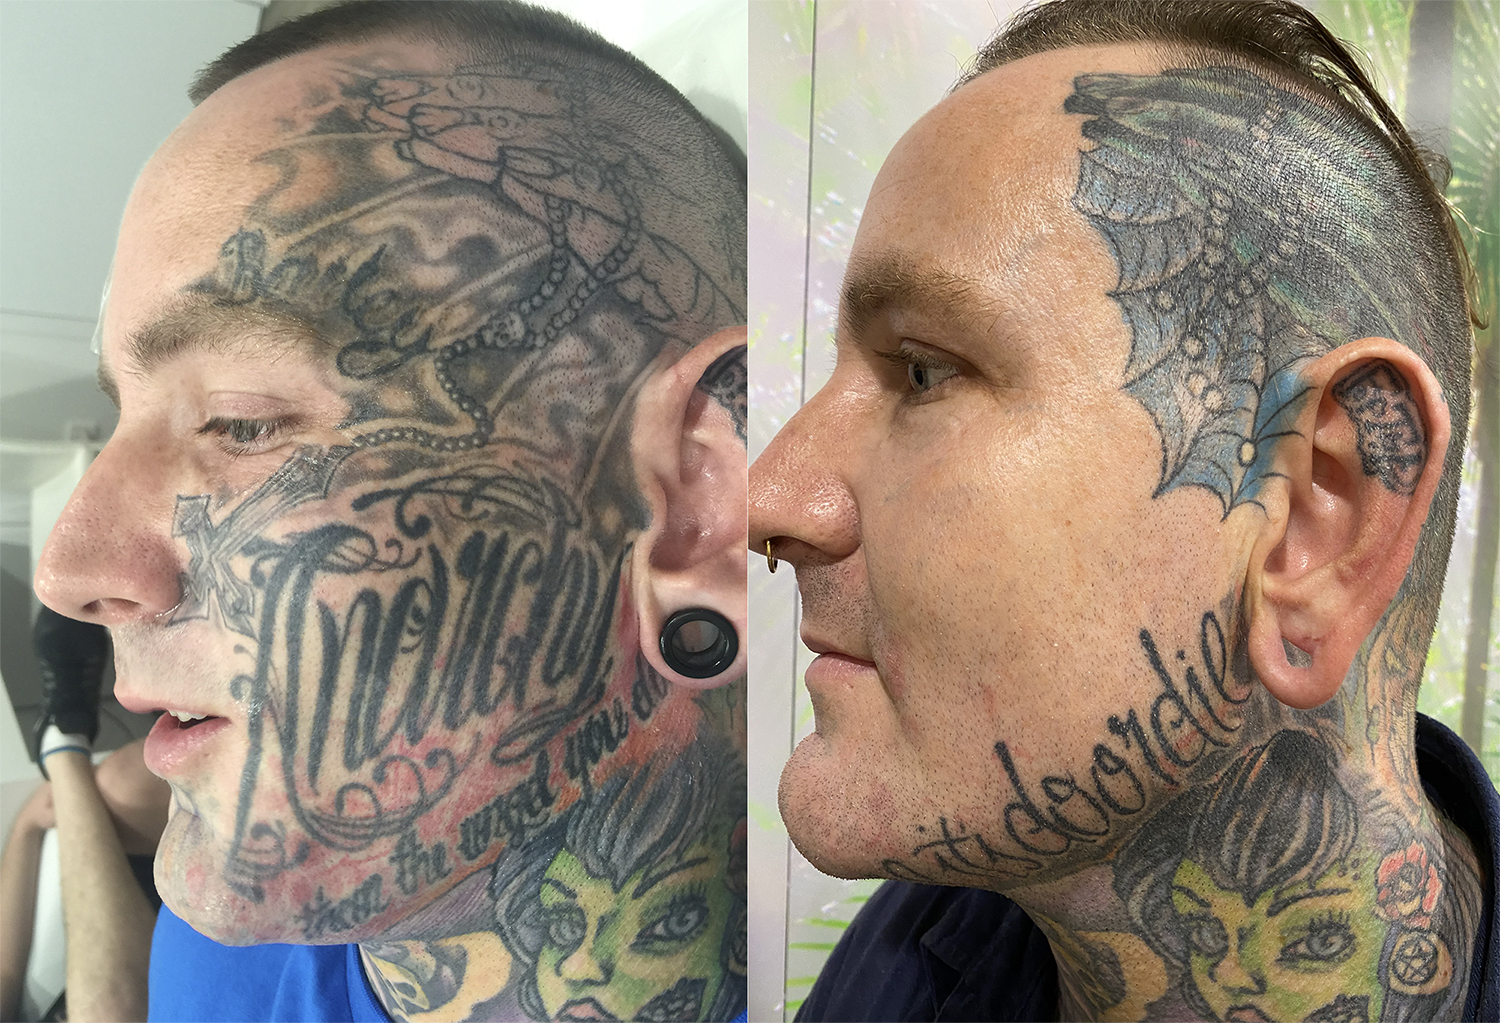 How to remove face tattoo